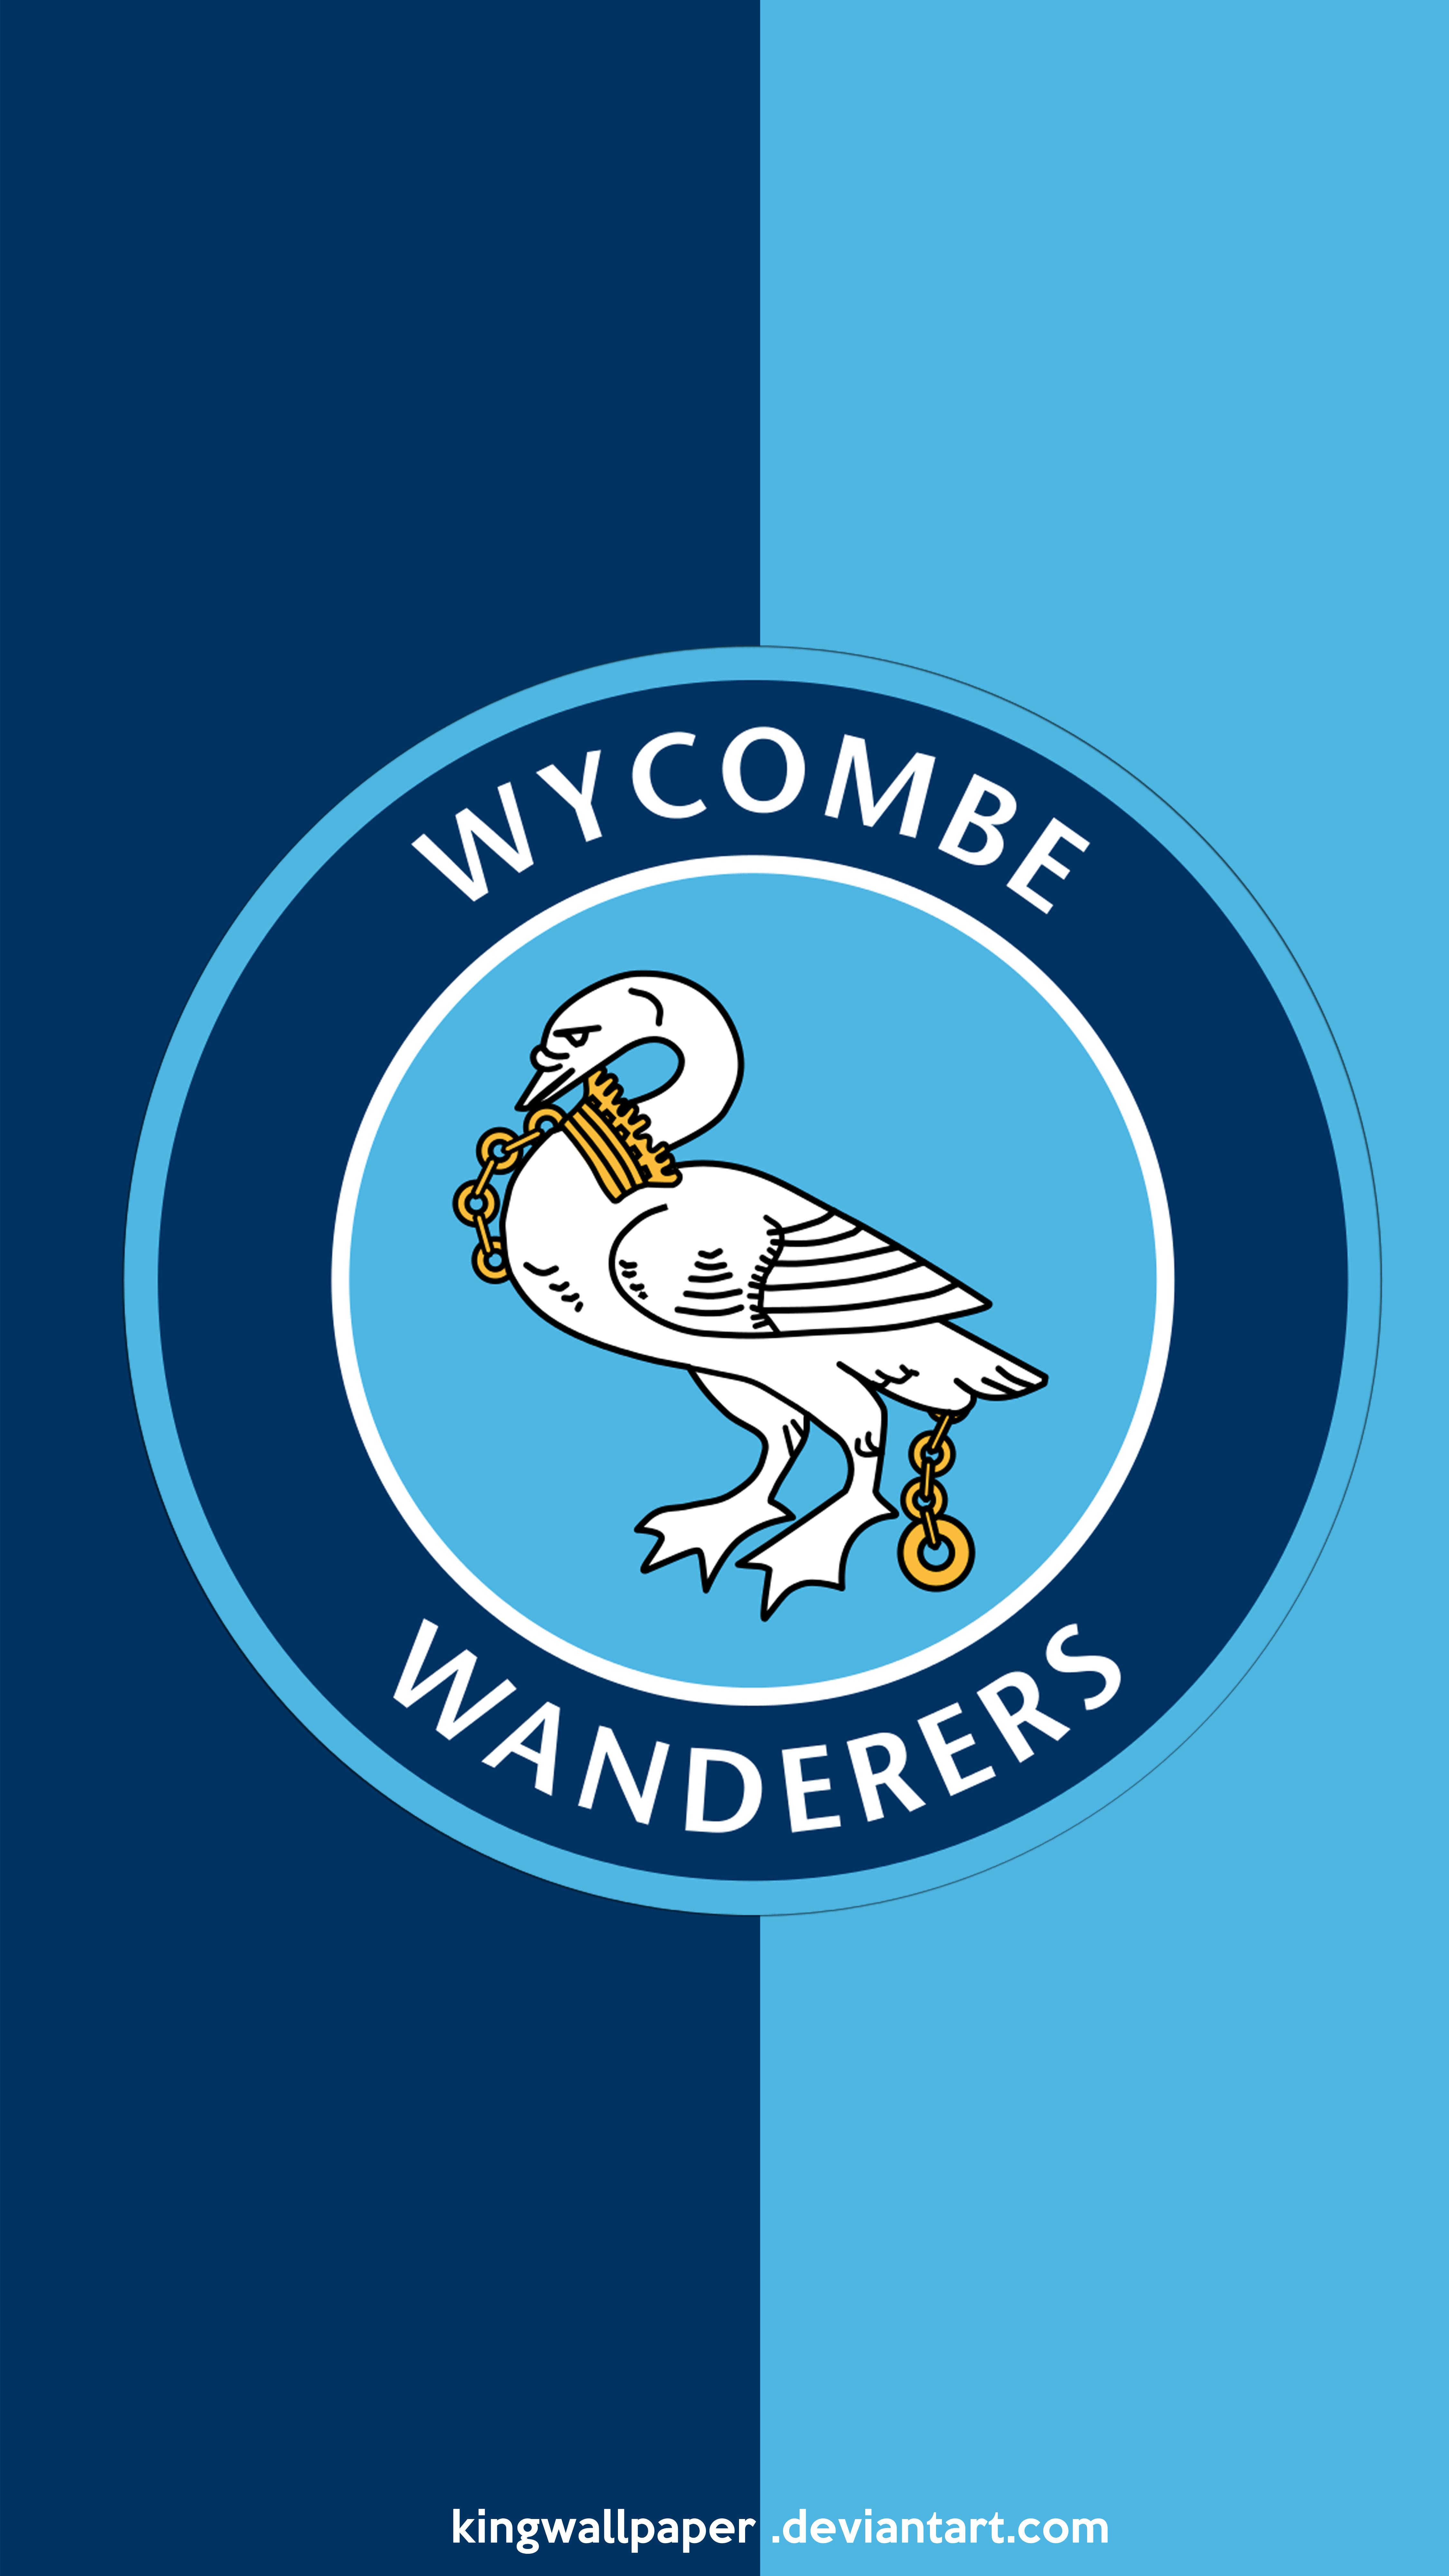 Wycombe Wanderers Wallpaper. Wycombe